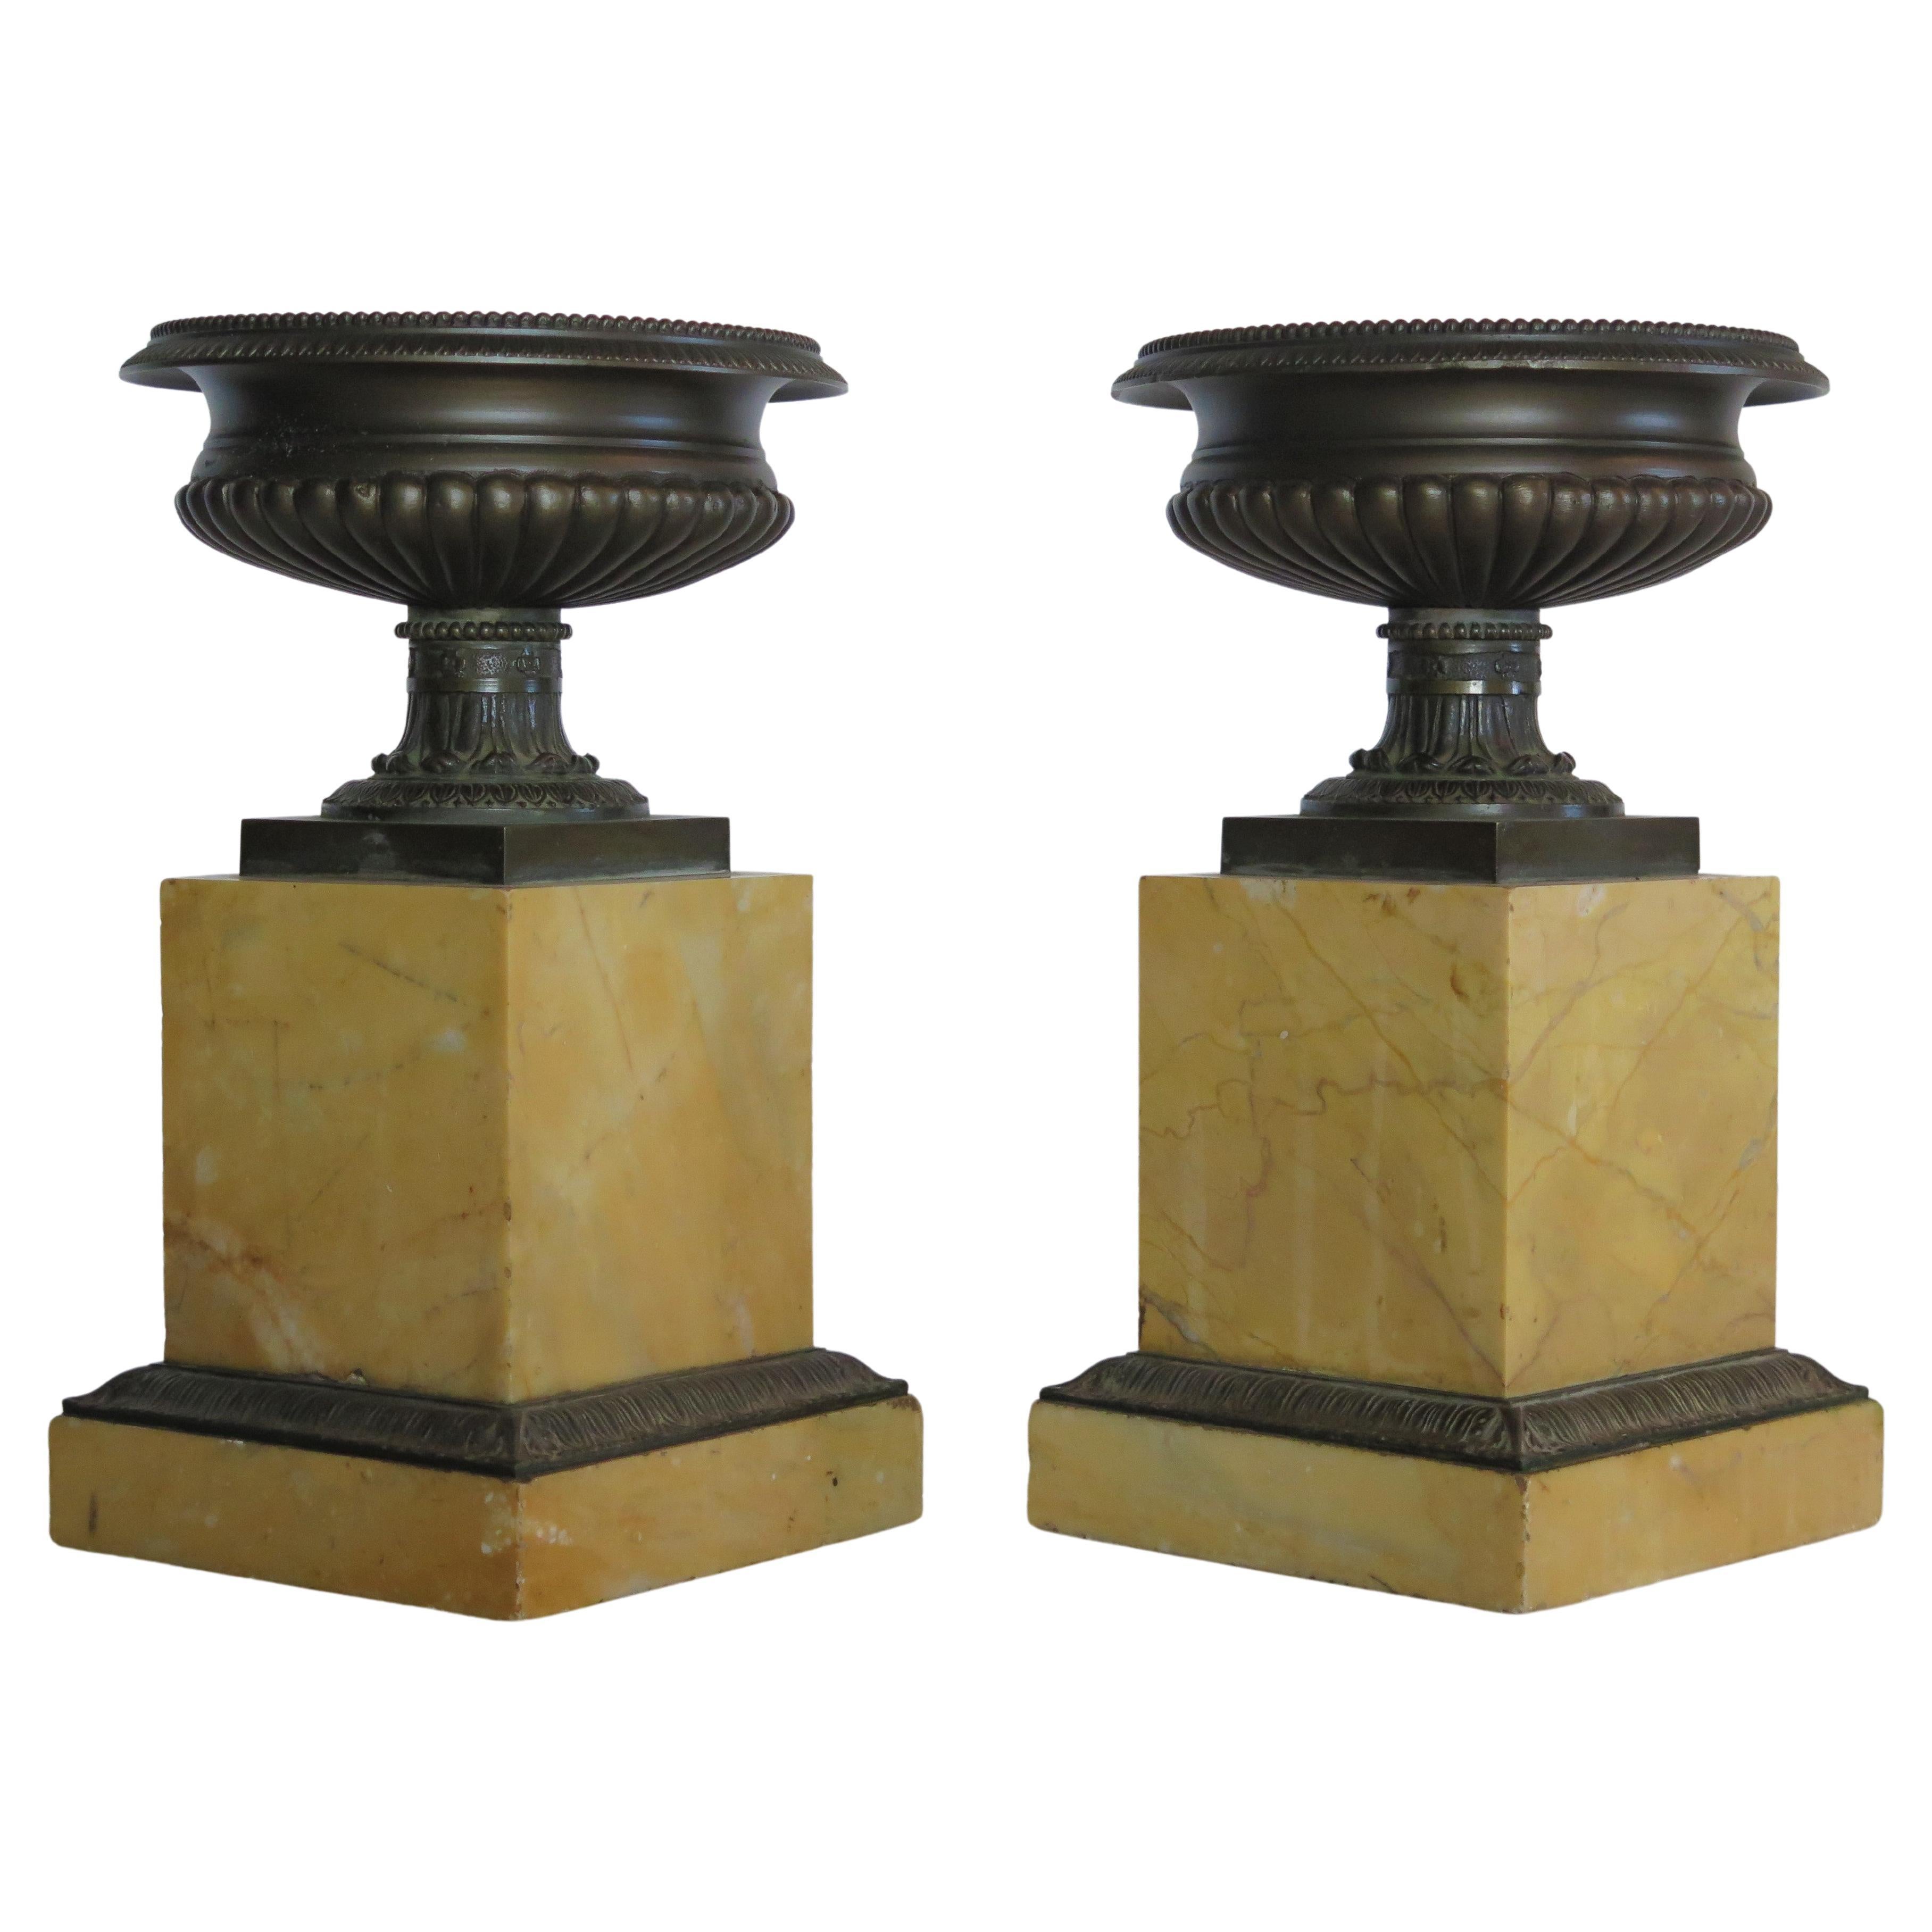 A pair of Grand Tour bronze tazzas raised on stepped sienna marble plinths and mounted on sienna marble bases with bronze molding. Circa 1820, Italy.